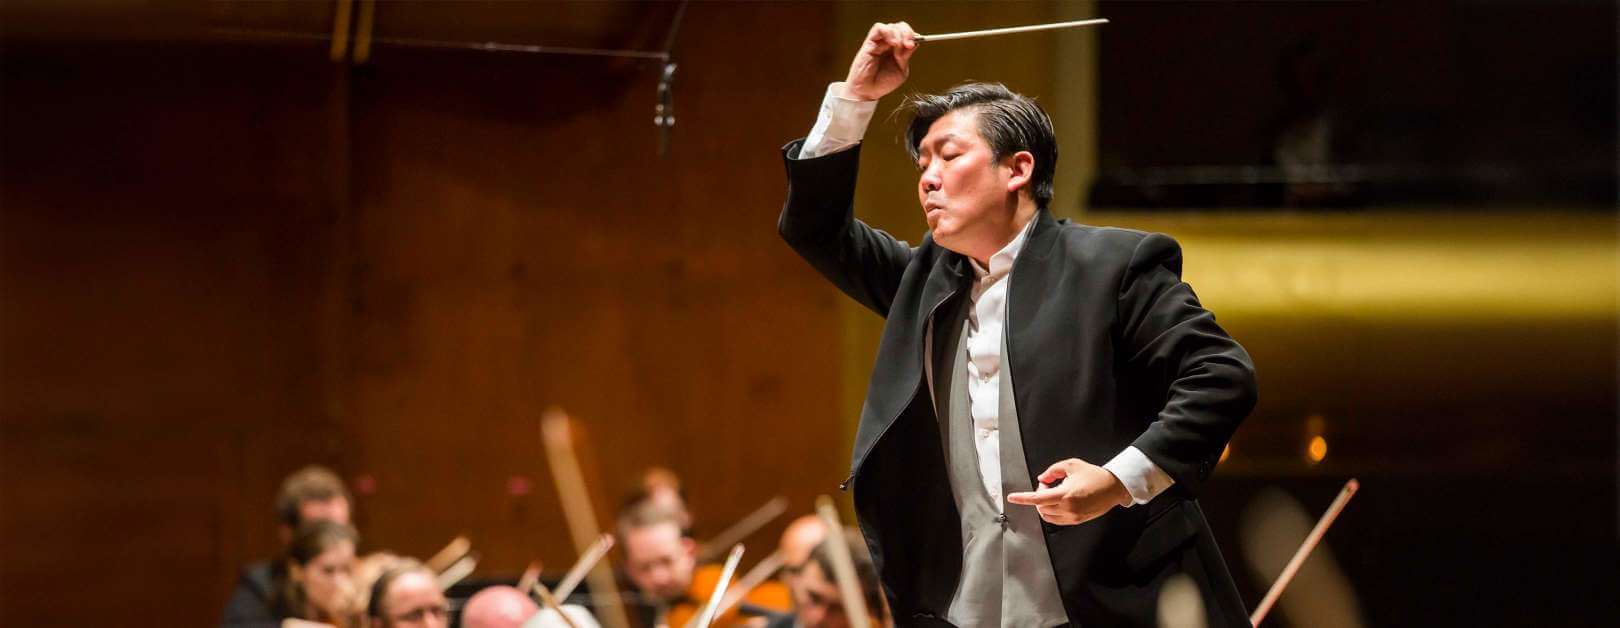 The New York Philharmonic's Special Concert The Year of the Rat - Upper Westside